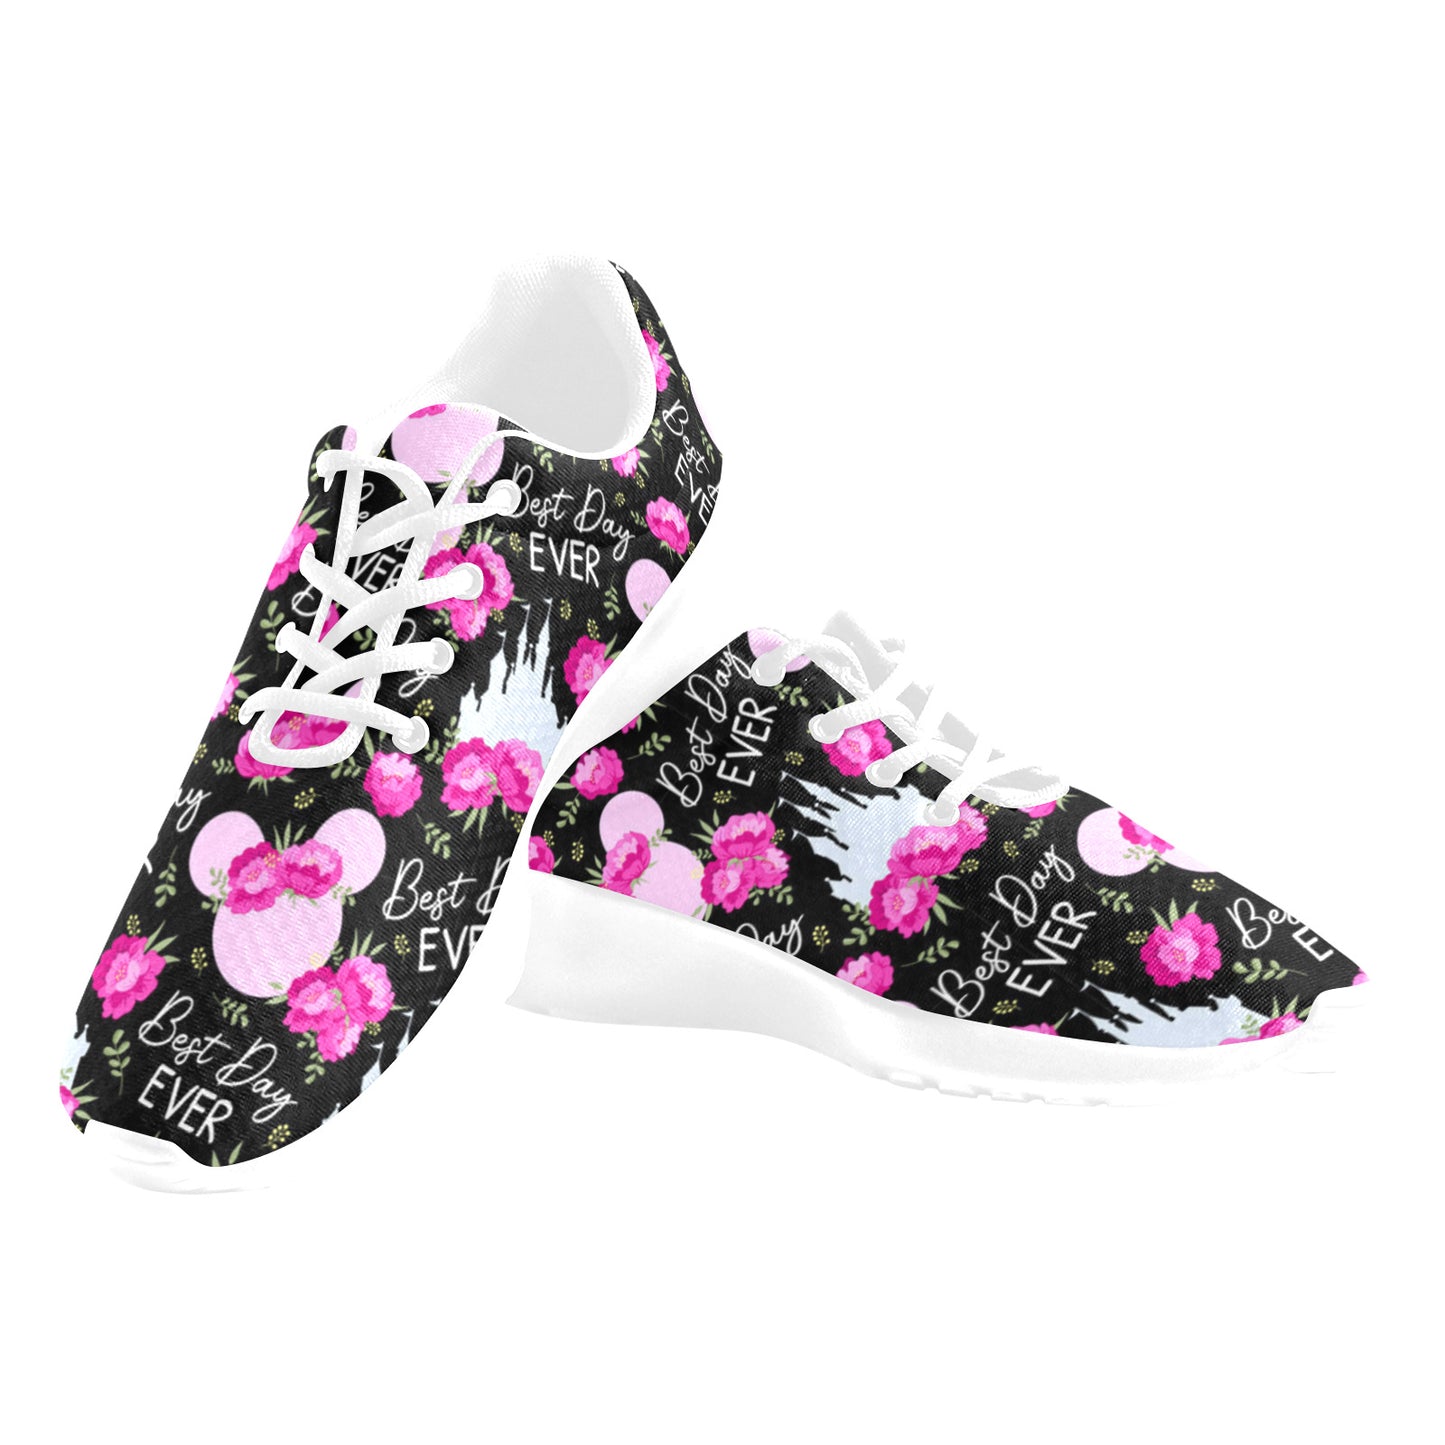 Best Day Ever Women's Athletic Shoes